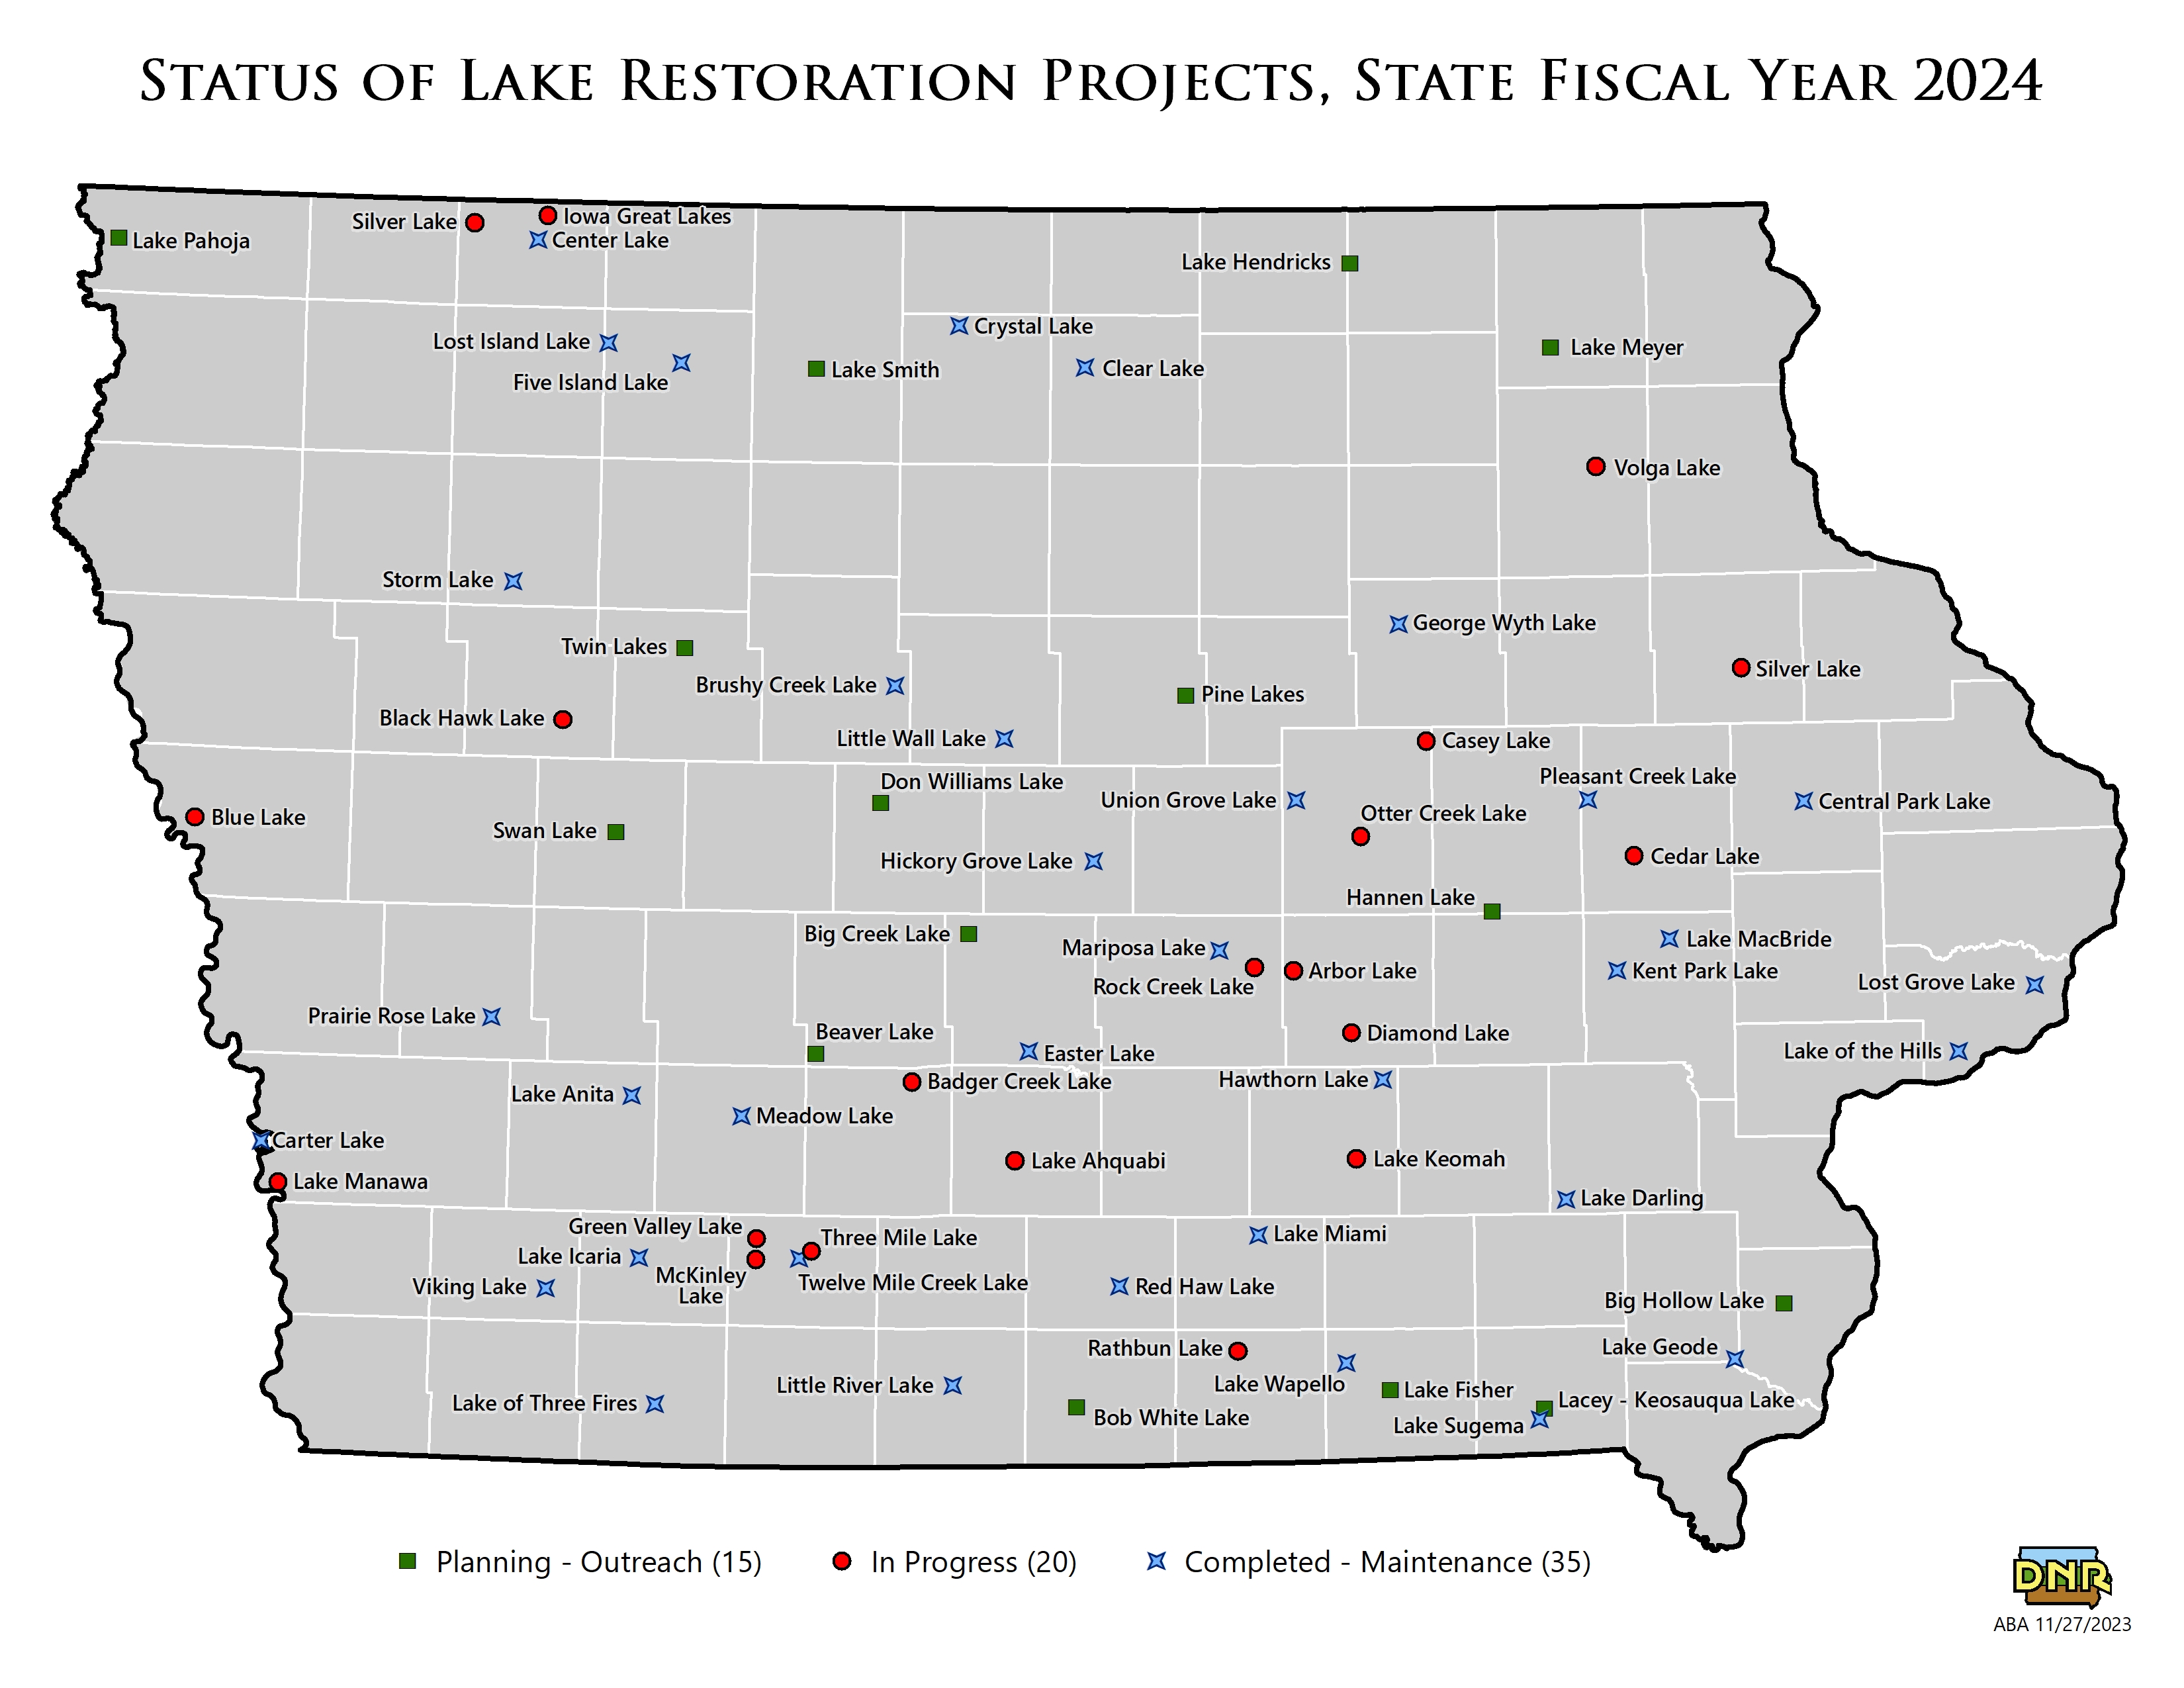 Status of Lake Restoration Projects, State Fiscal Year 2024